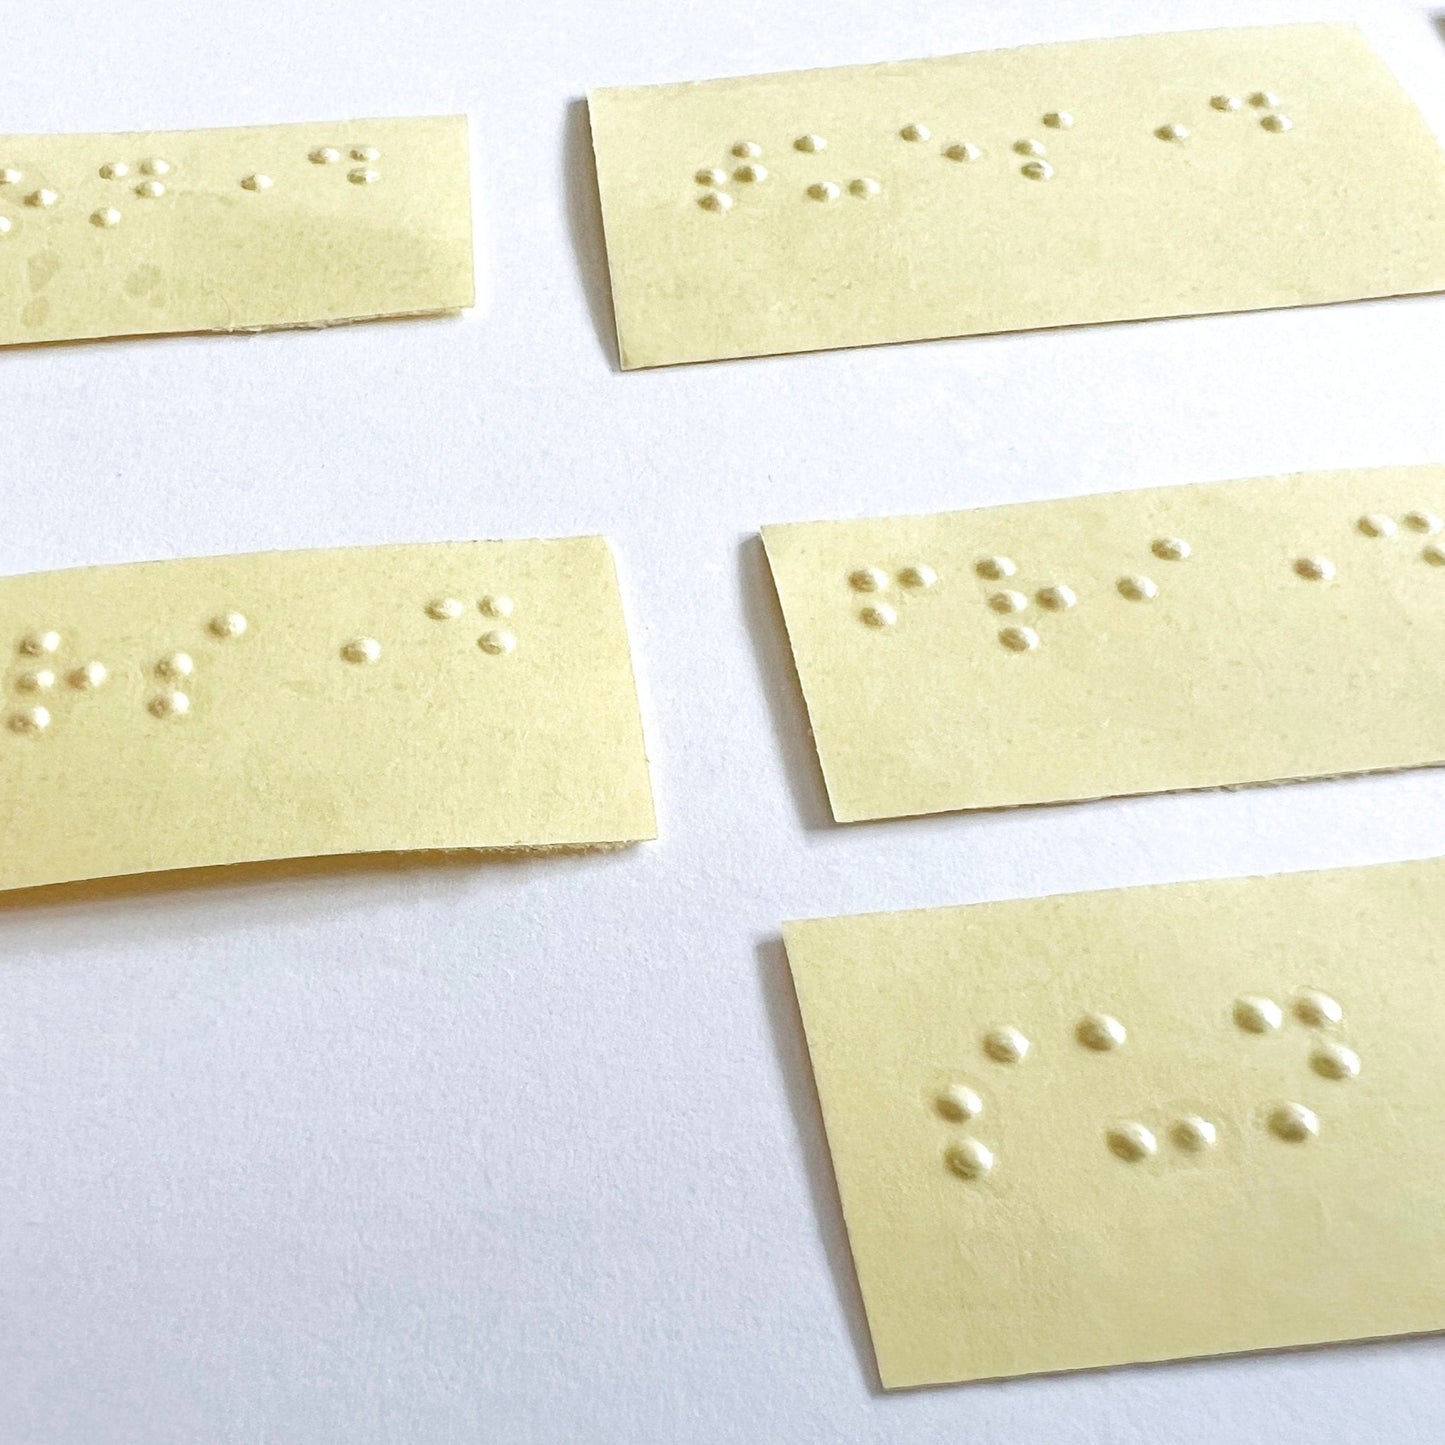 A close up of some of the days of the week braille labels. Labels are on a yellow backing paper and the labels themselves are clear.